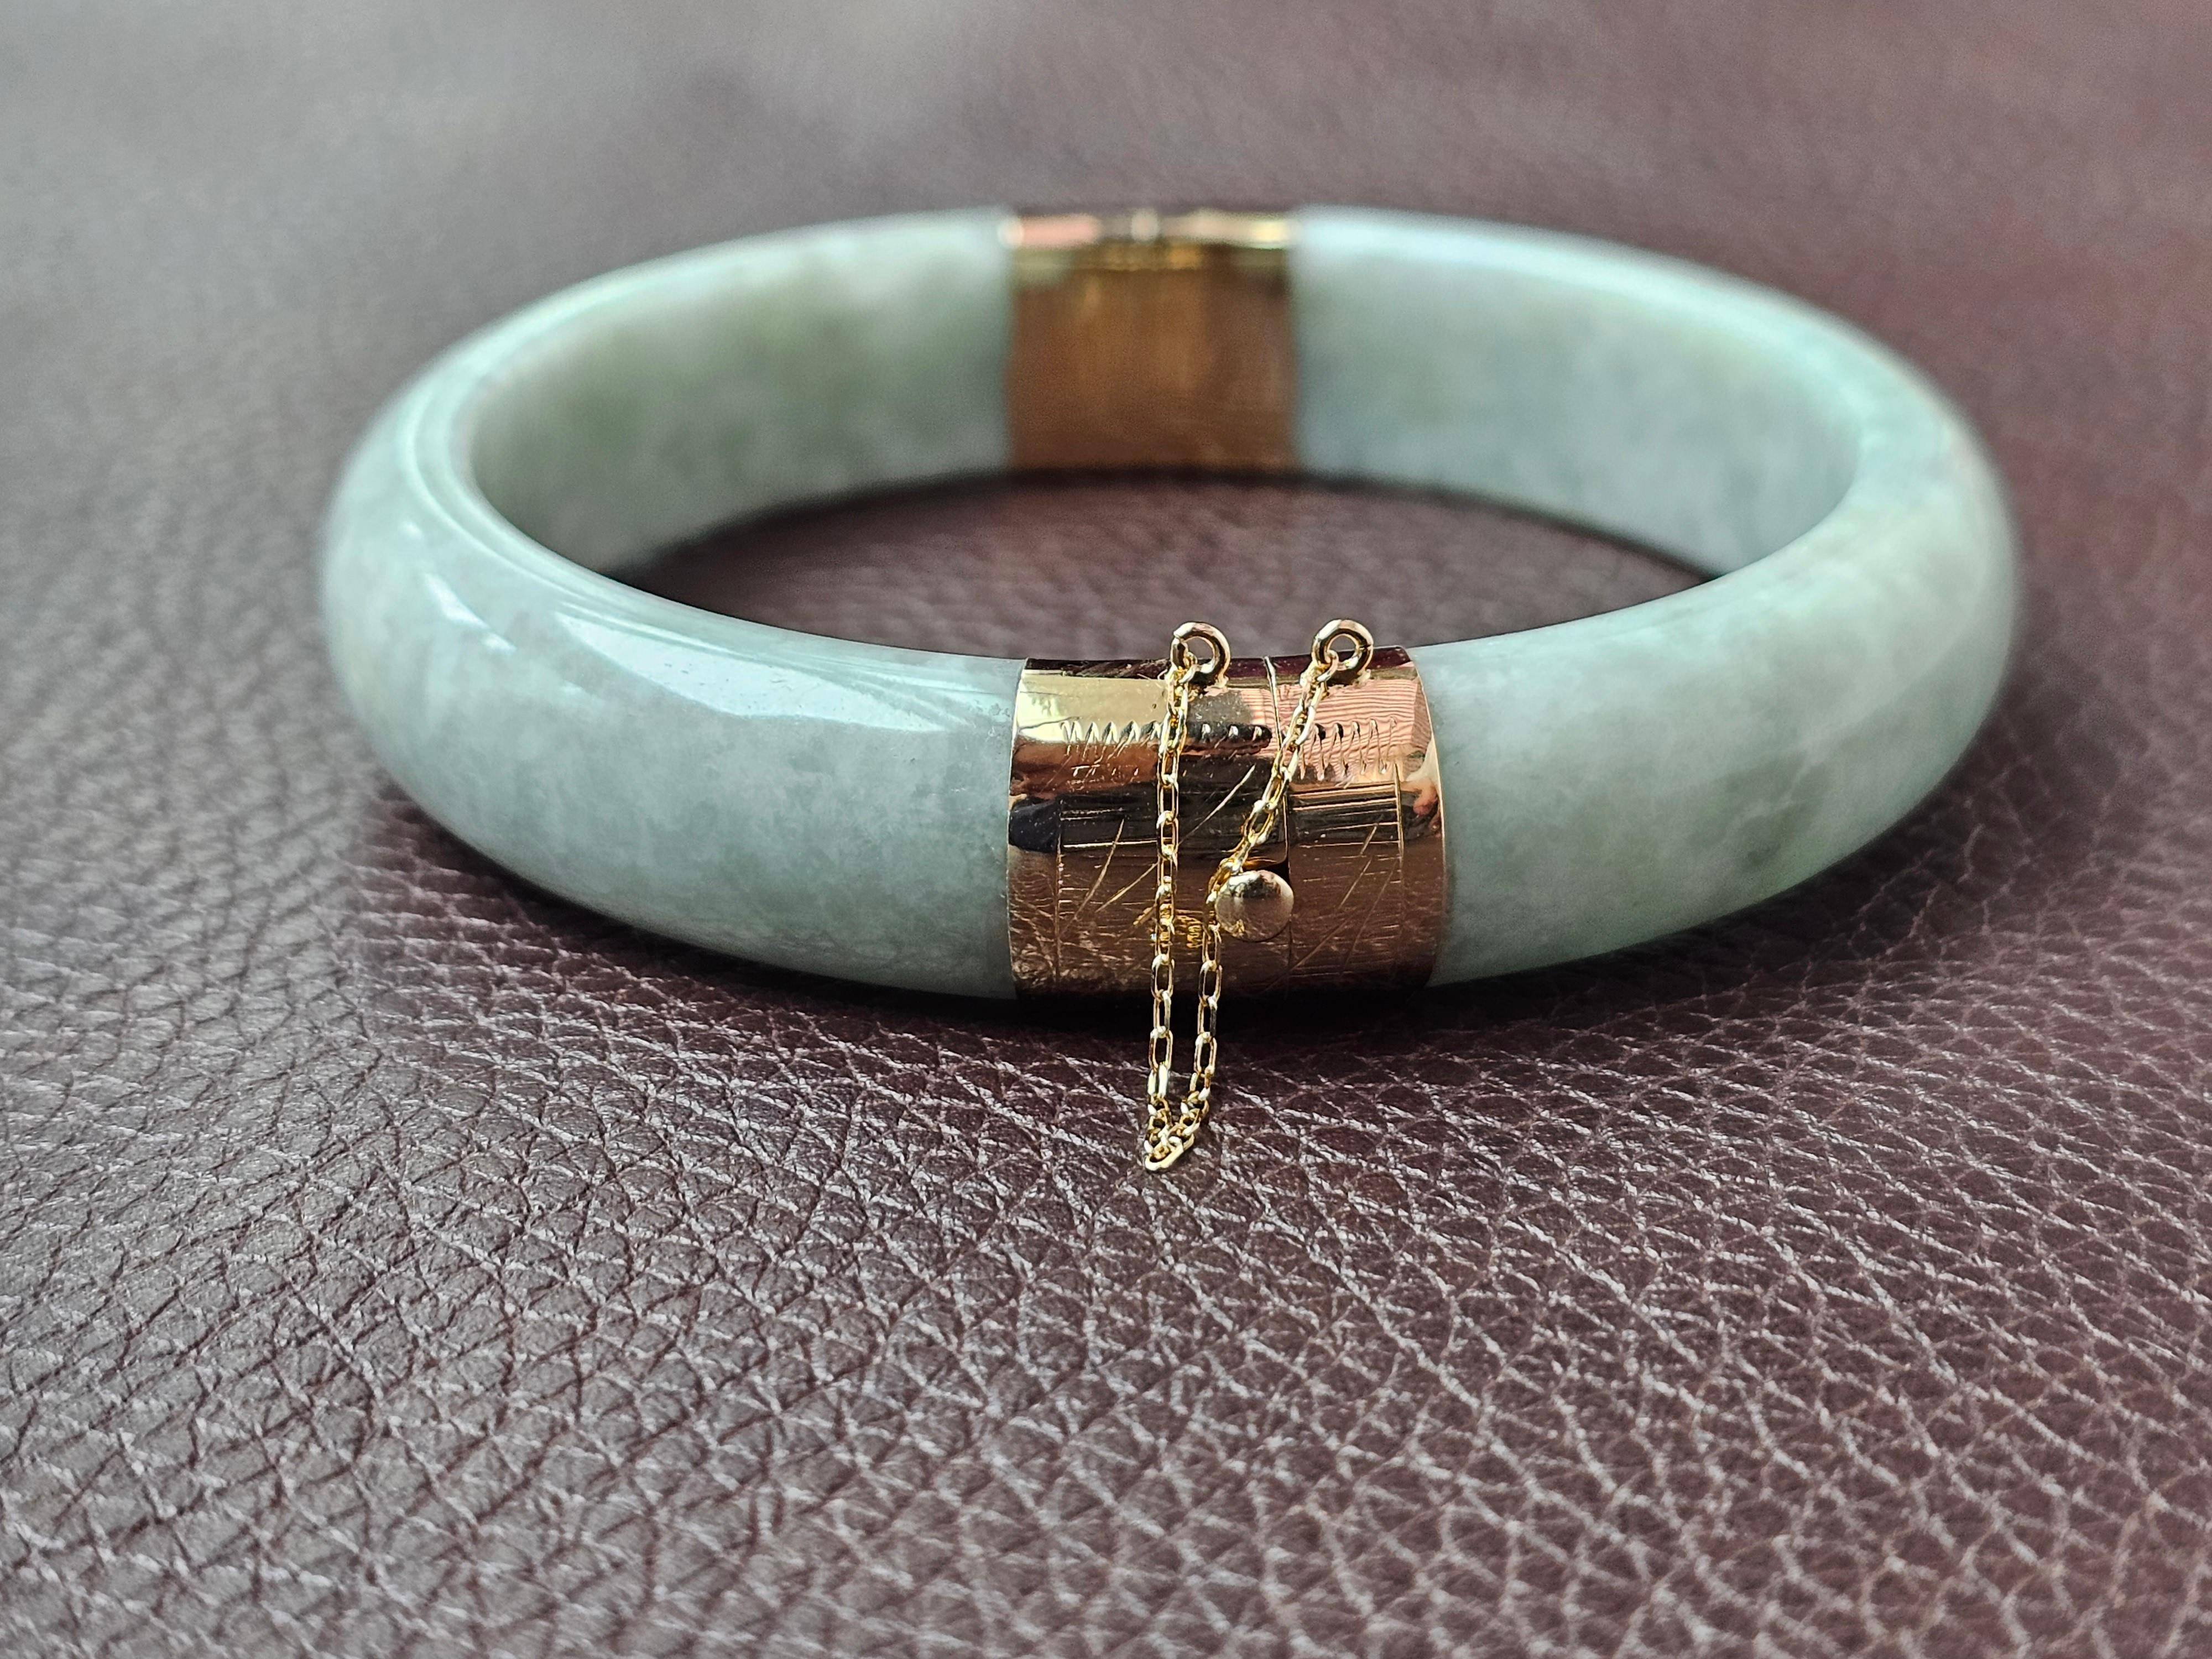 Viceroy's Circular Burmese A-Jade Bangle Bracelet (with 14K Gold) In New Condition For Sale In Kowloon, HK